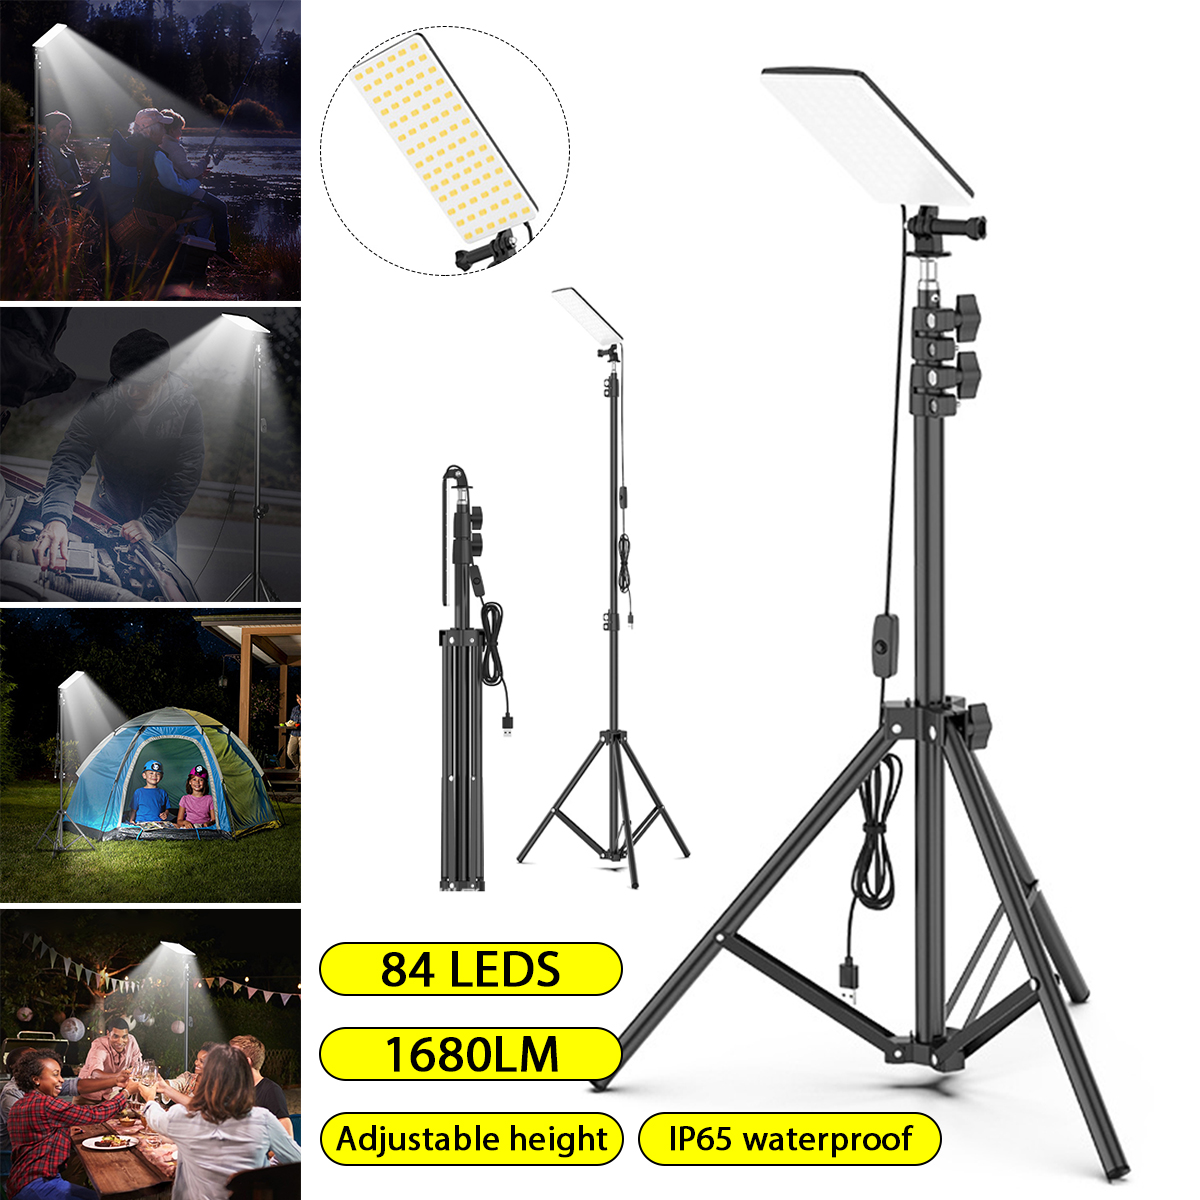 1680LM-Multifunctional-Camping-Light-Retractable-Tripod-Stand-USB-Rechargeable-Waterproof-Outdoor-Po-1898532-3